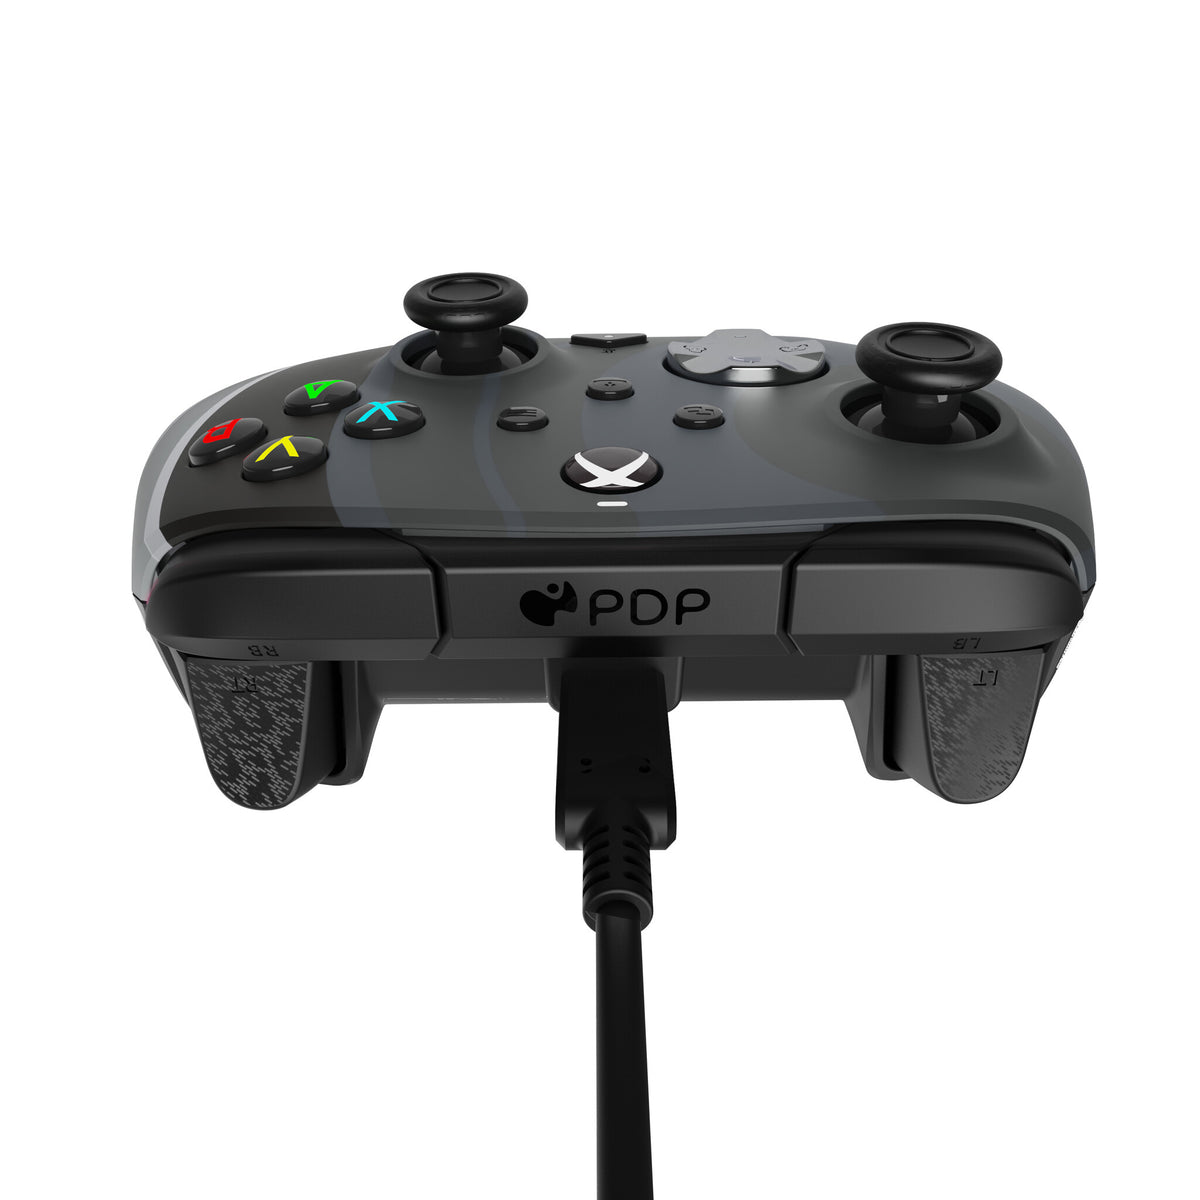 PDP Rematch - USB Wired Gamepad for PC / Xbox Series X|S in Radial Black